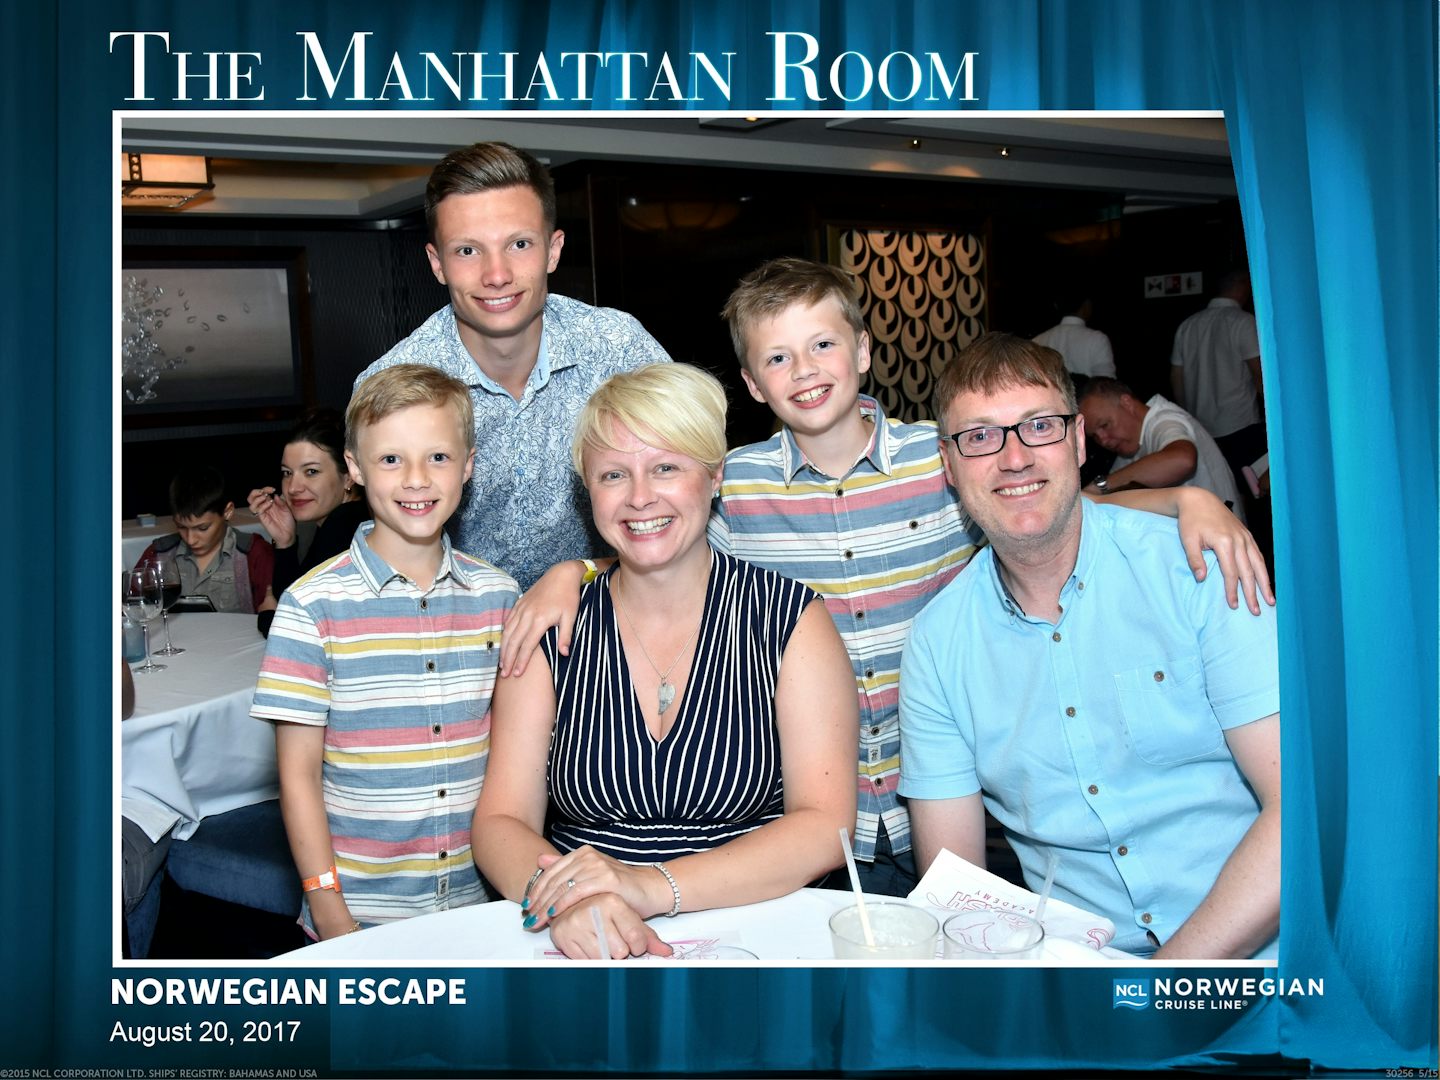 A family meal at 'The Manhattan Room' restaurant.